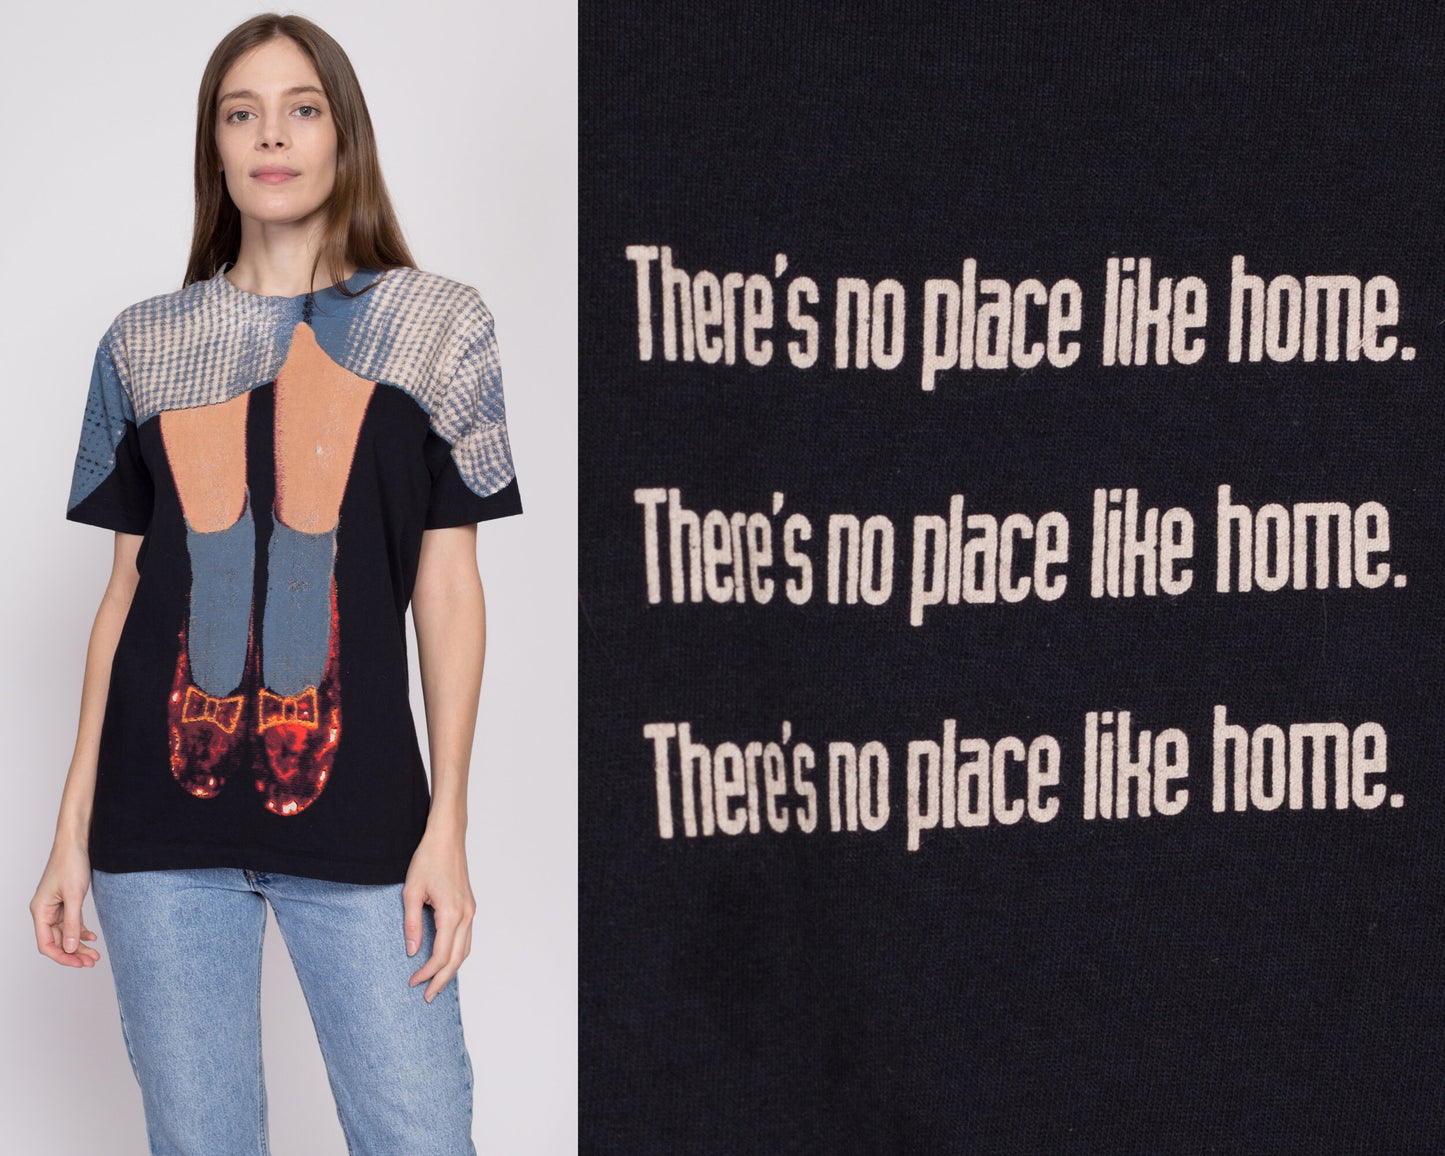 M| Vintage 1993 Wizard Of Oz Stanley Desantis "There's No Place Like Home" T Shirt - Unisex Medium | Rare 90s Dorothy Ruby Slippers Tee